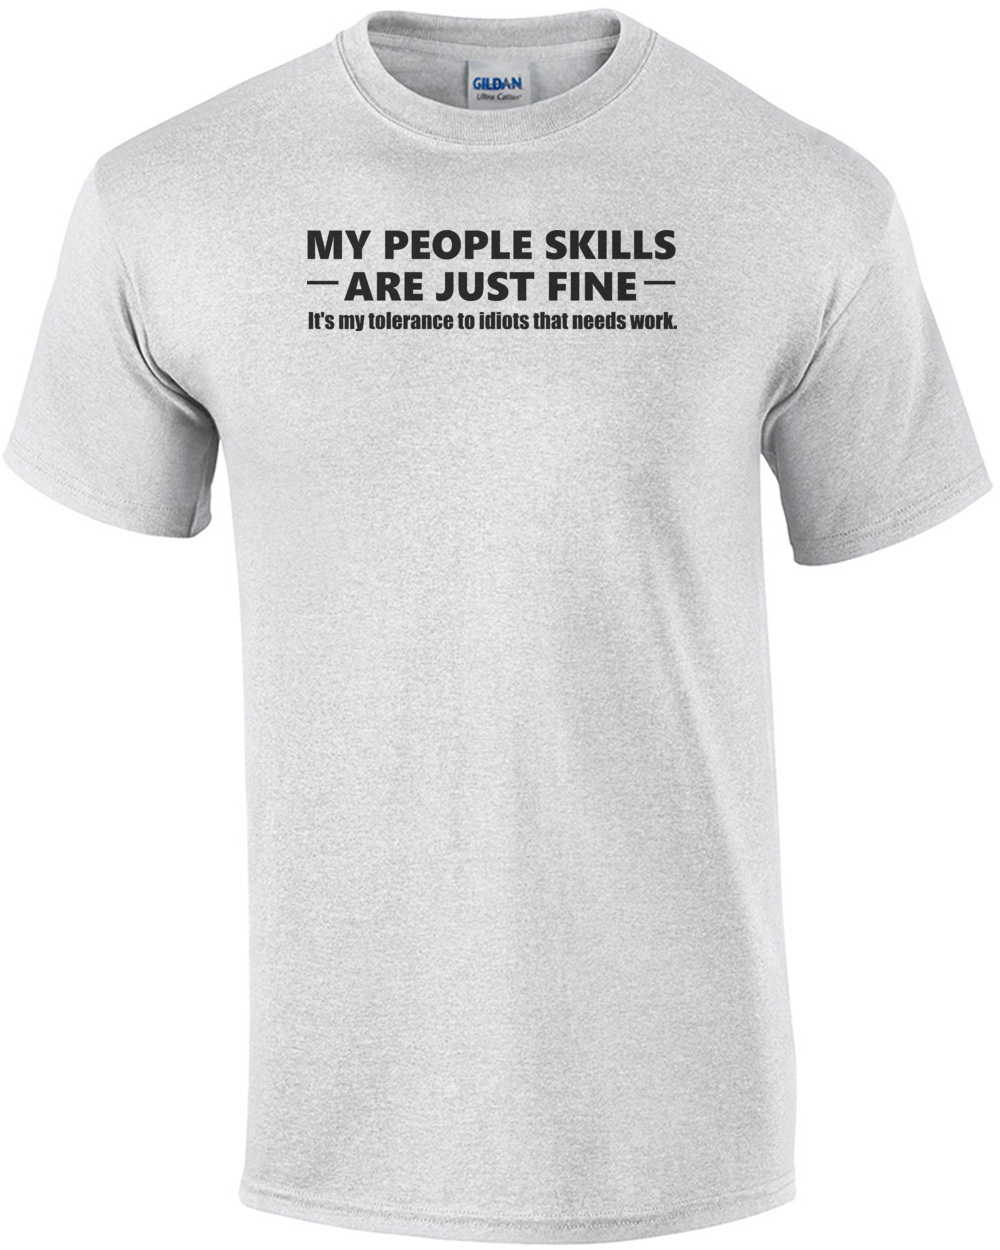 My People Skills Are Fine,Intolerance To Idiots Funny T-Shirt Novelty Gift T Shirt for Men or Women,Joke shirt for Him Her Unisex T-Shirt